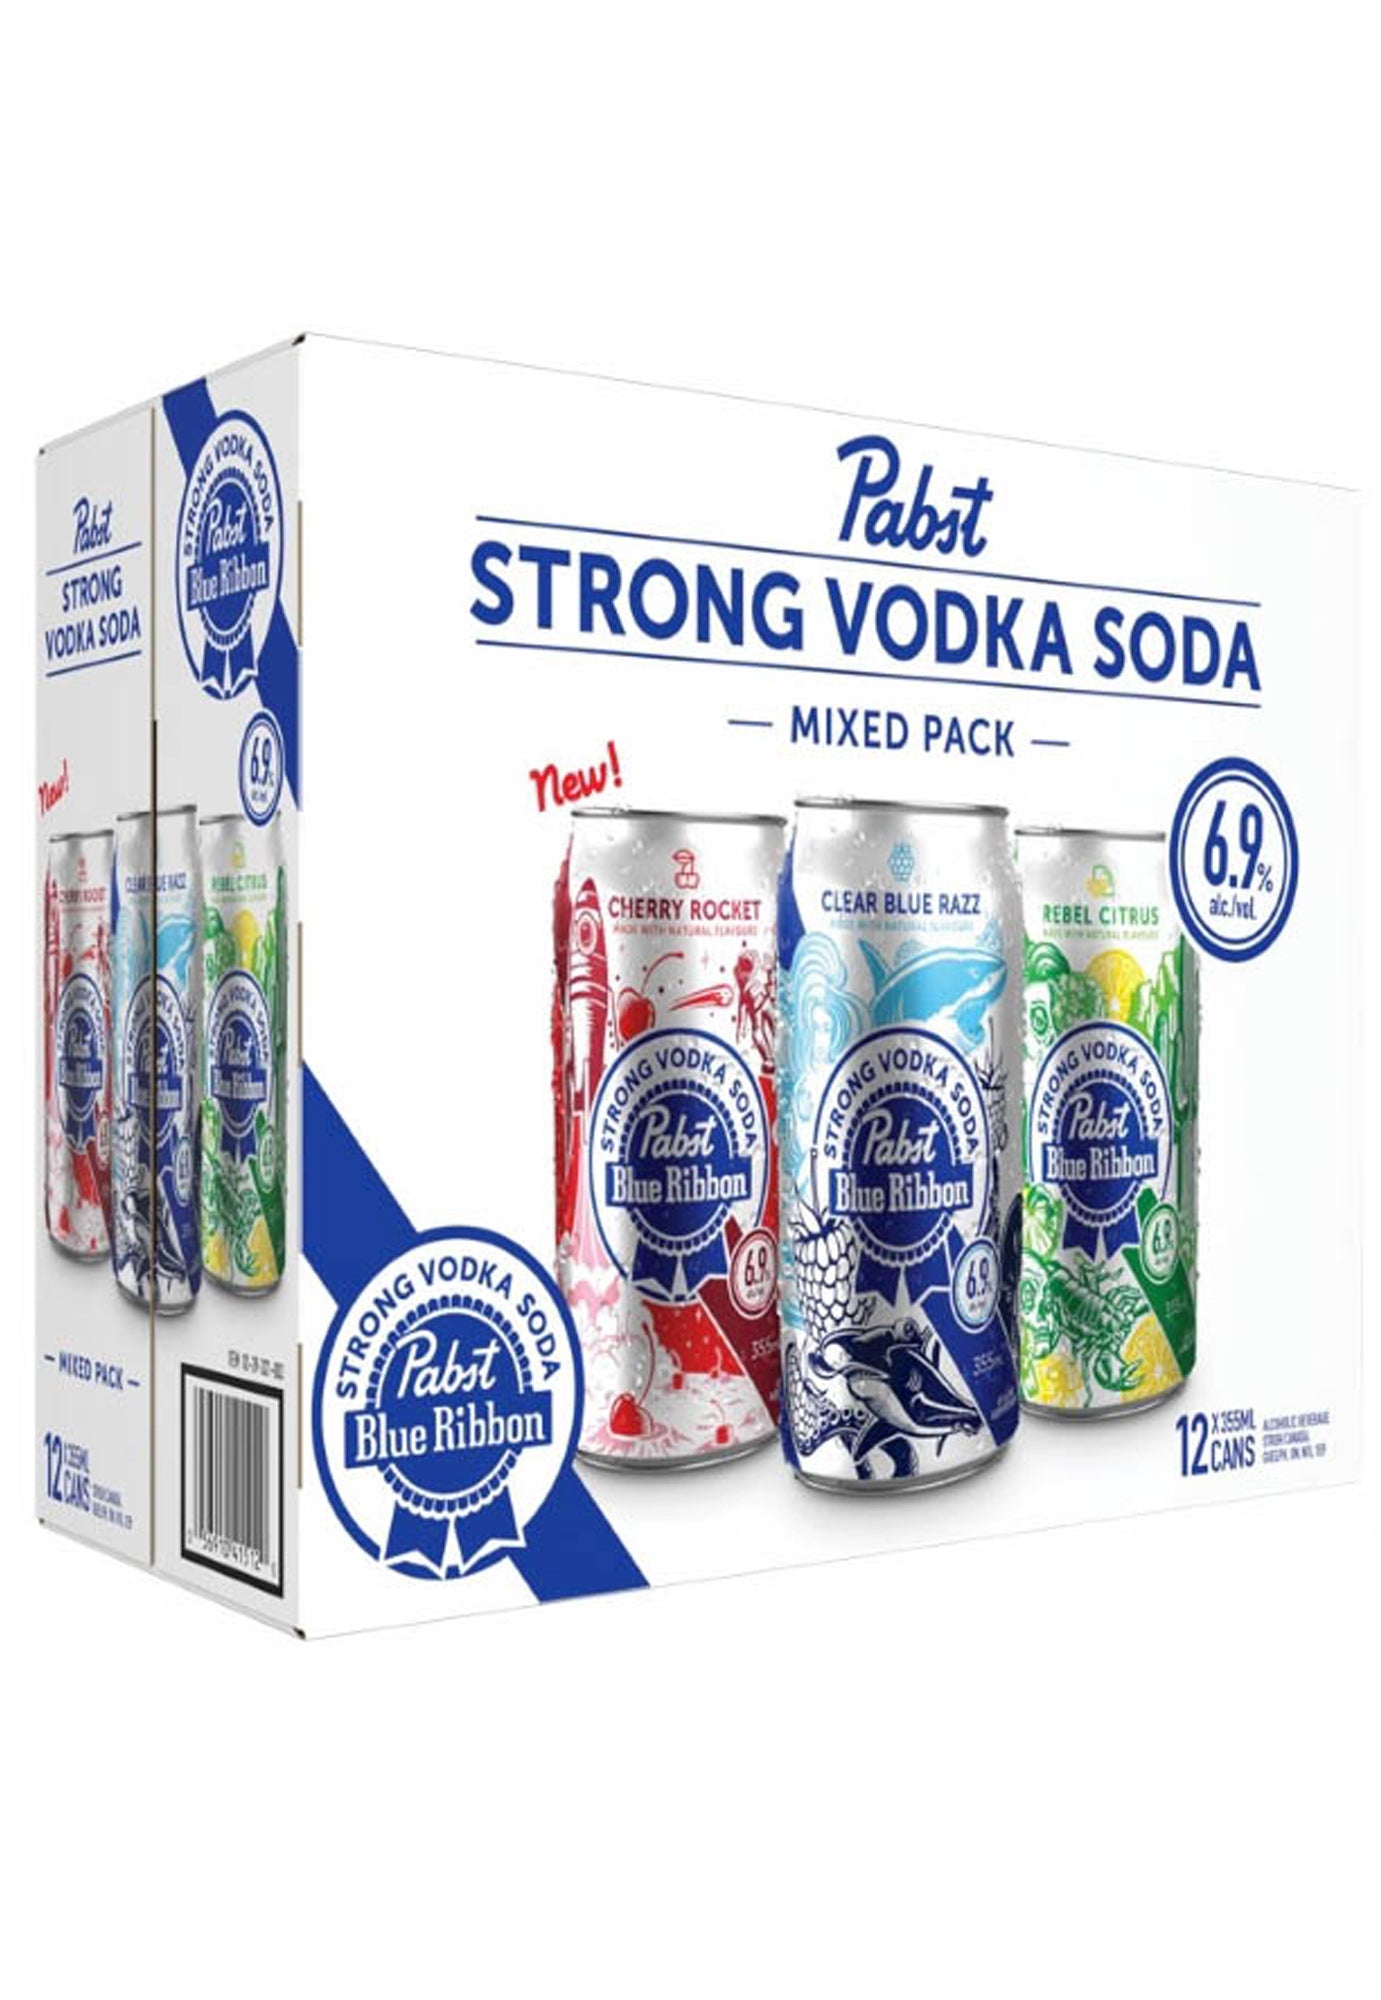 Pabst Vodka Soda Mixed Pack - 12 Cans